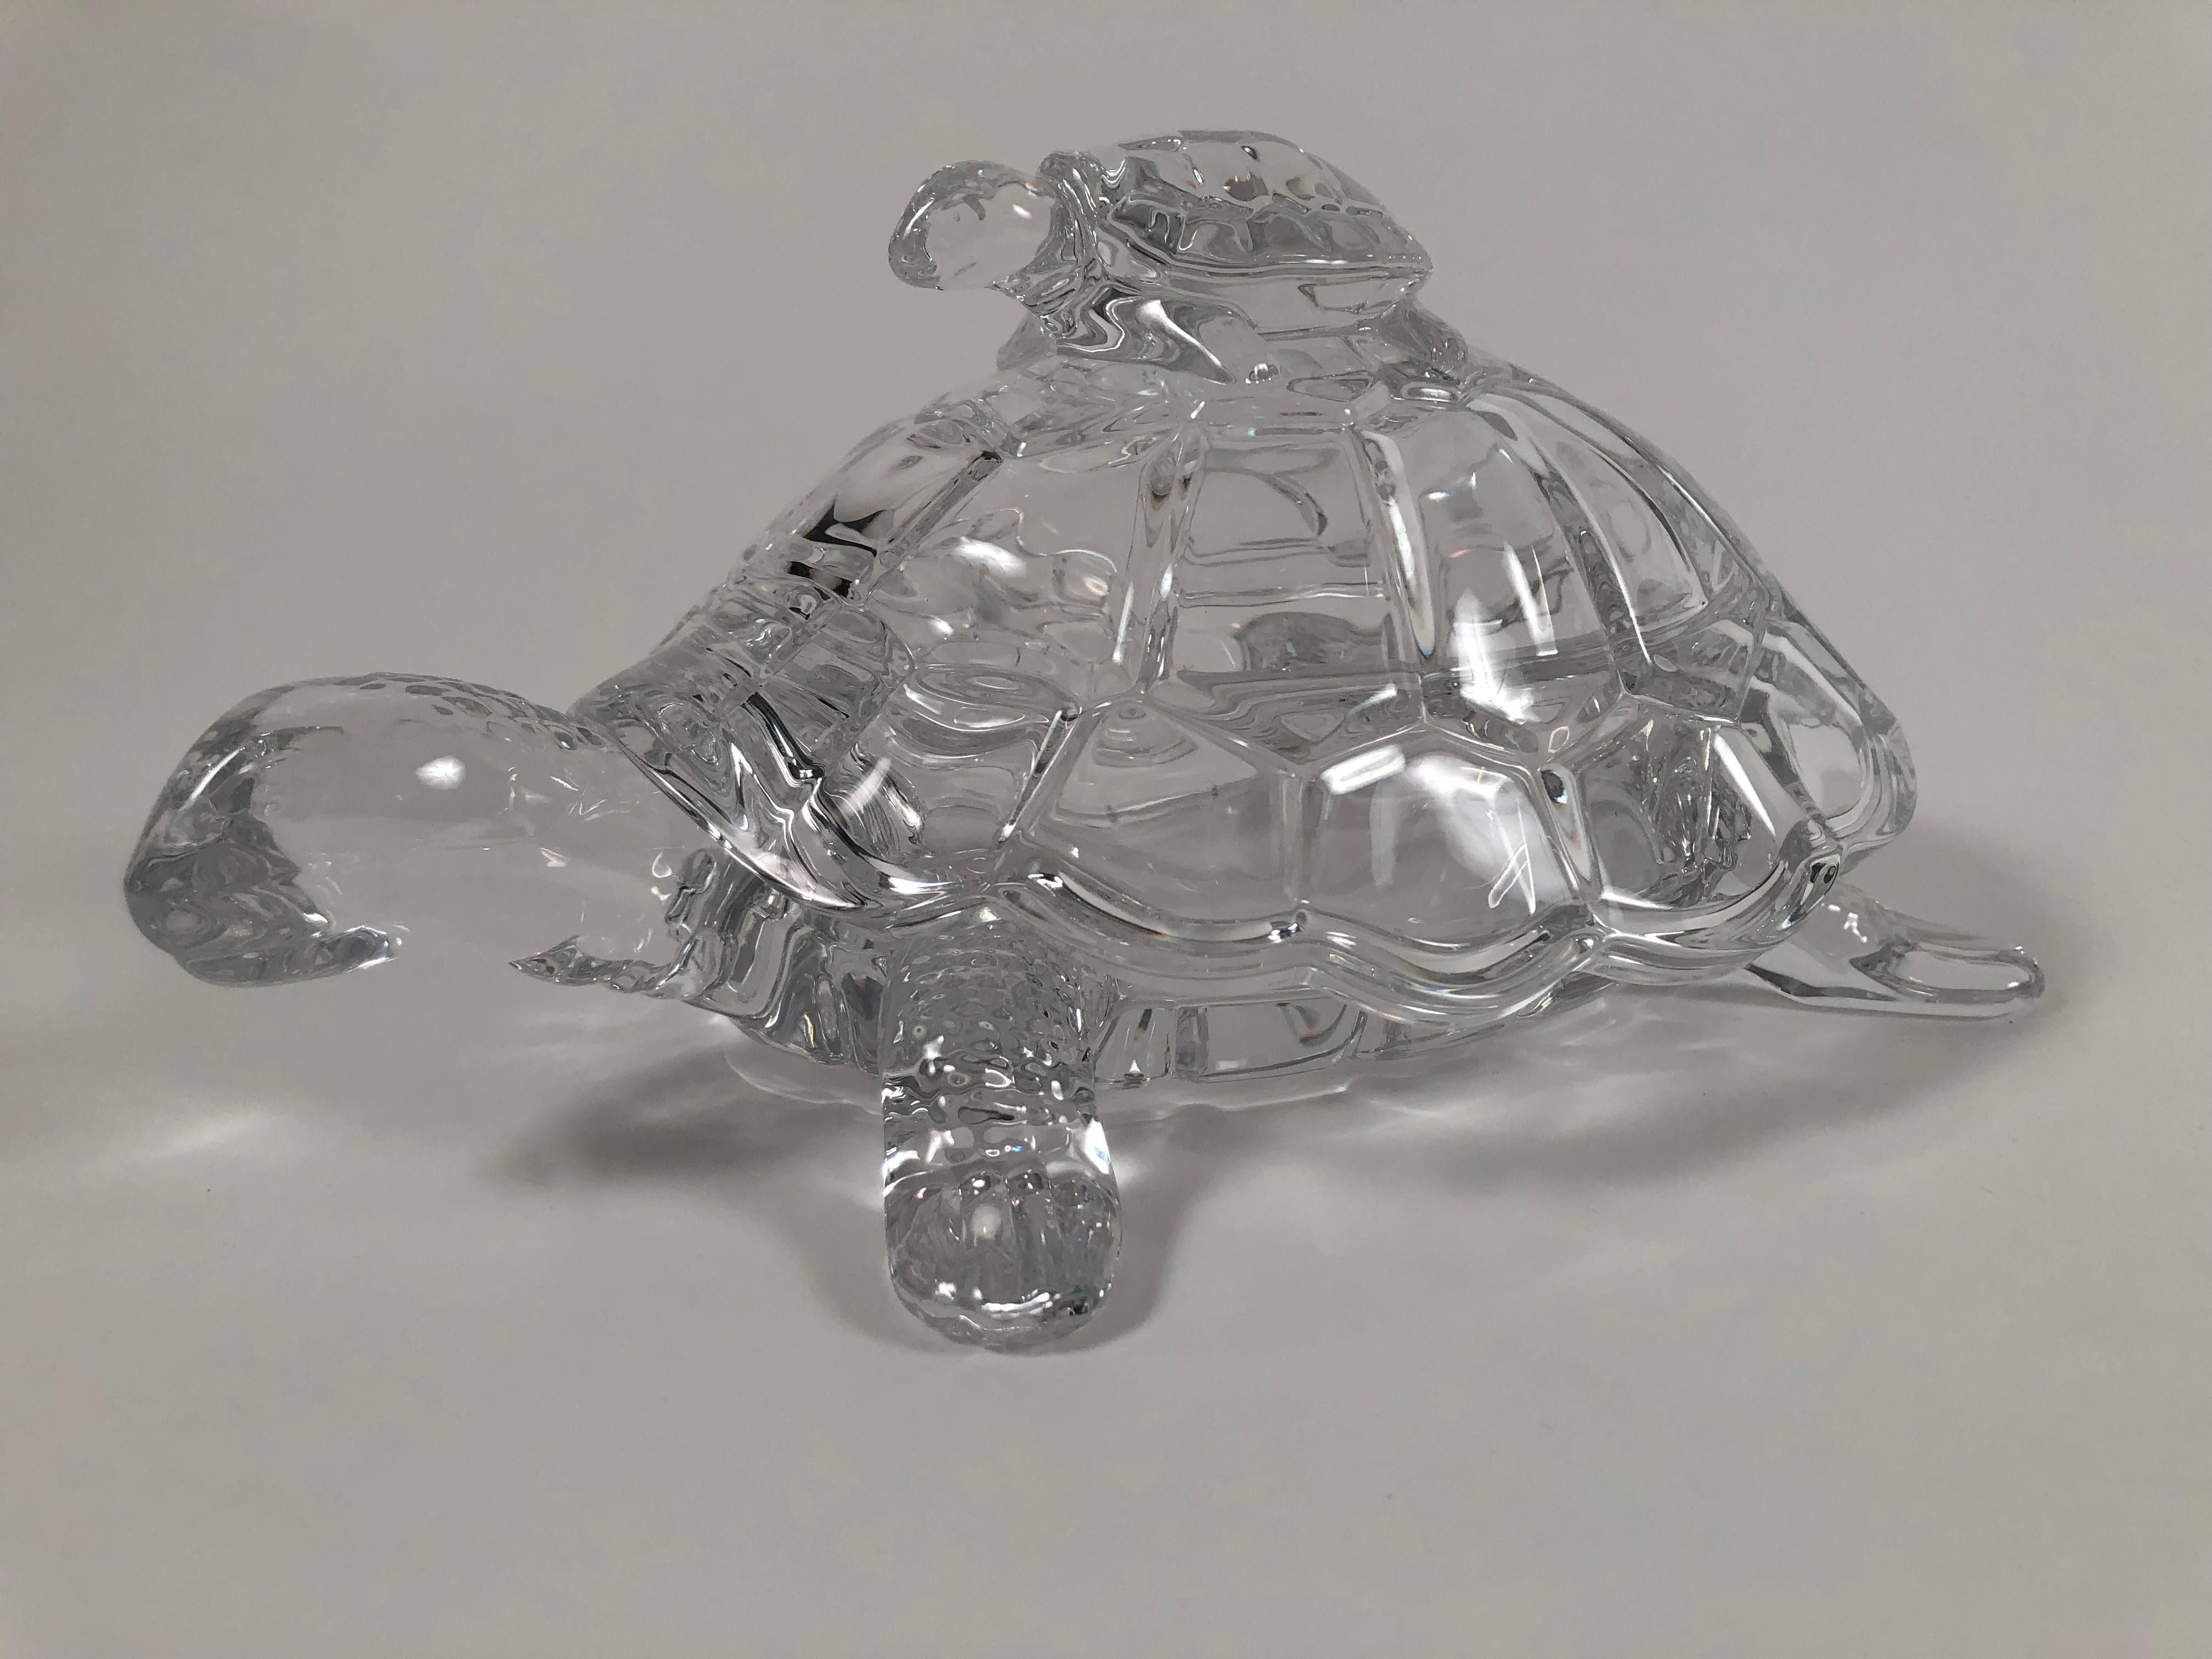 A well modeled clear glass turtle form candy dish, the removable top with baby turtle finial enclosing an oval footed dish which is perfect for serving candy or nuts. Very nice quality, good weight and form, in excellent condition.